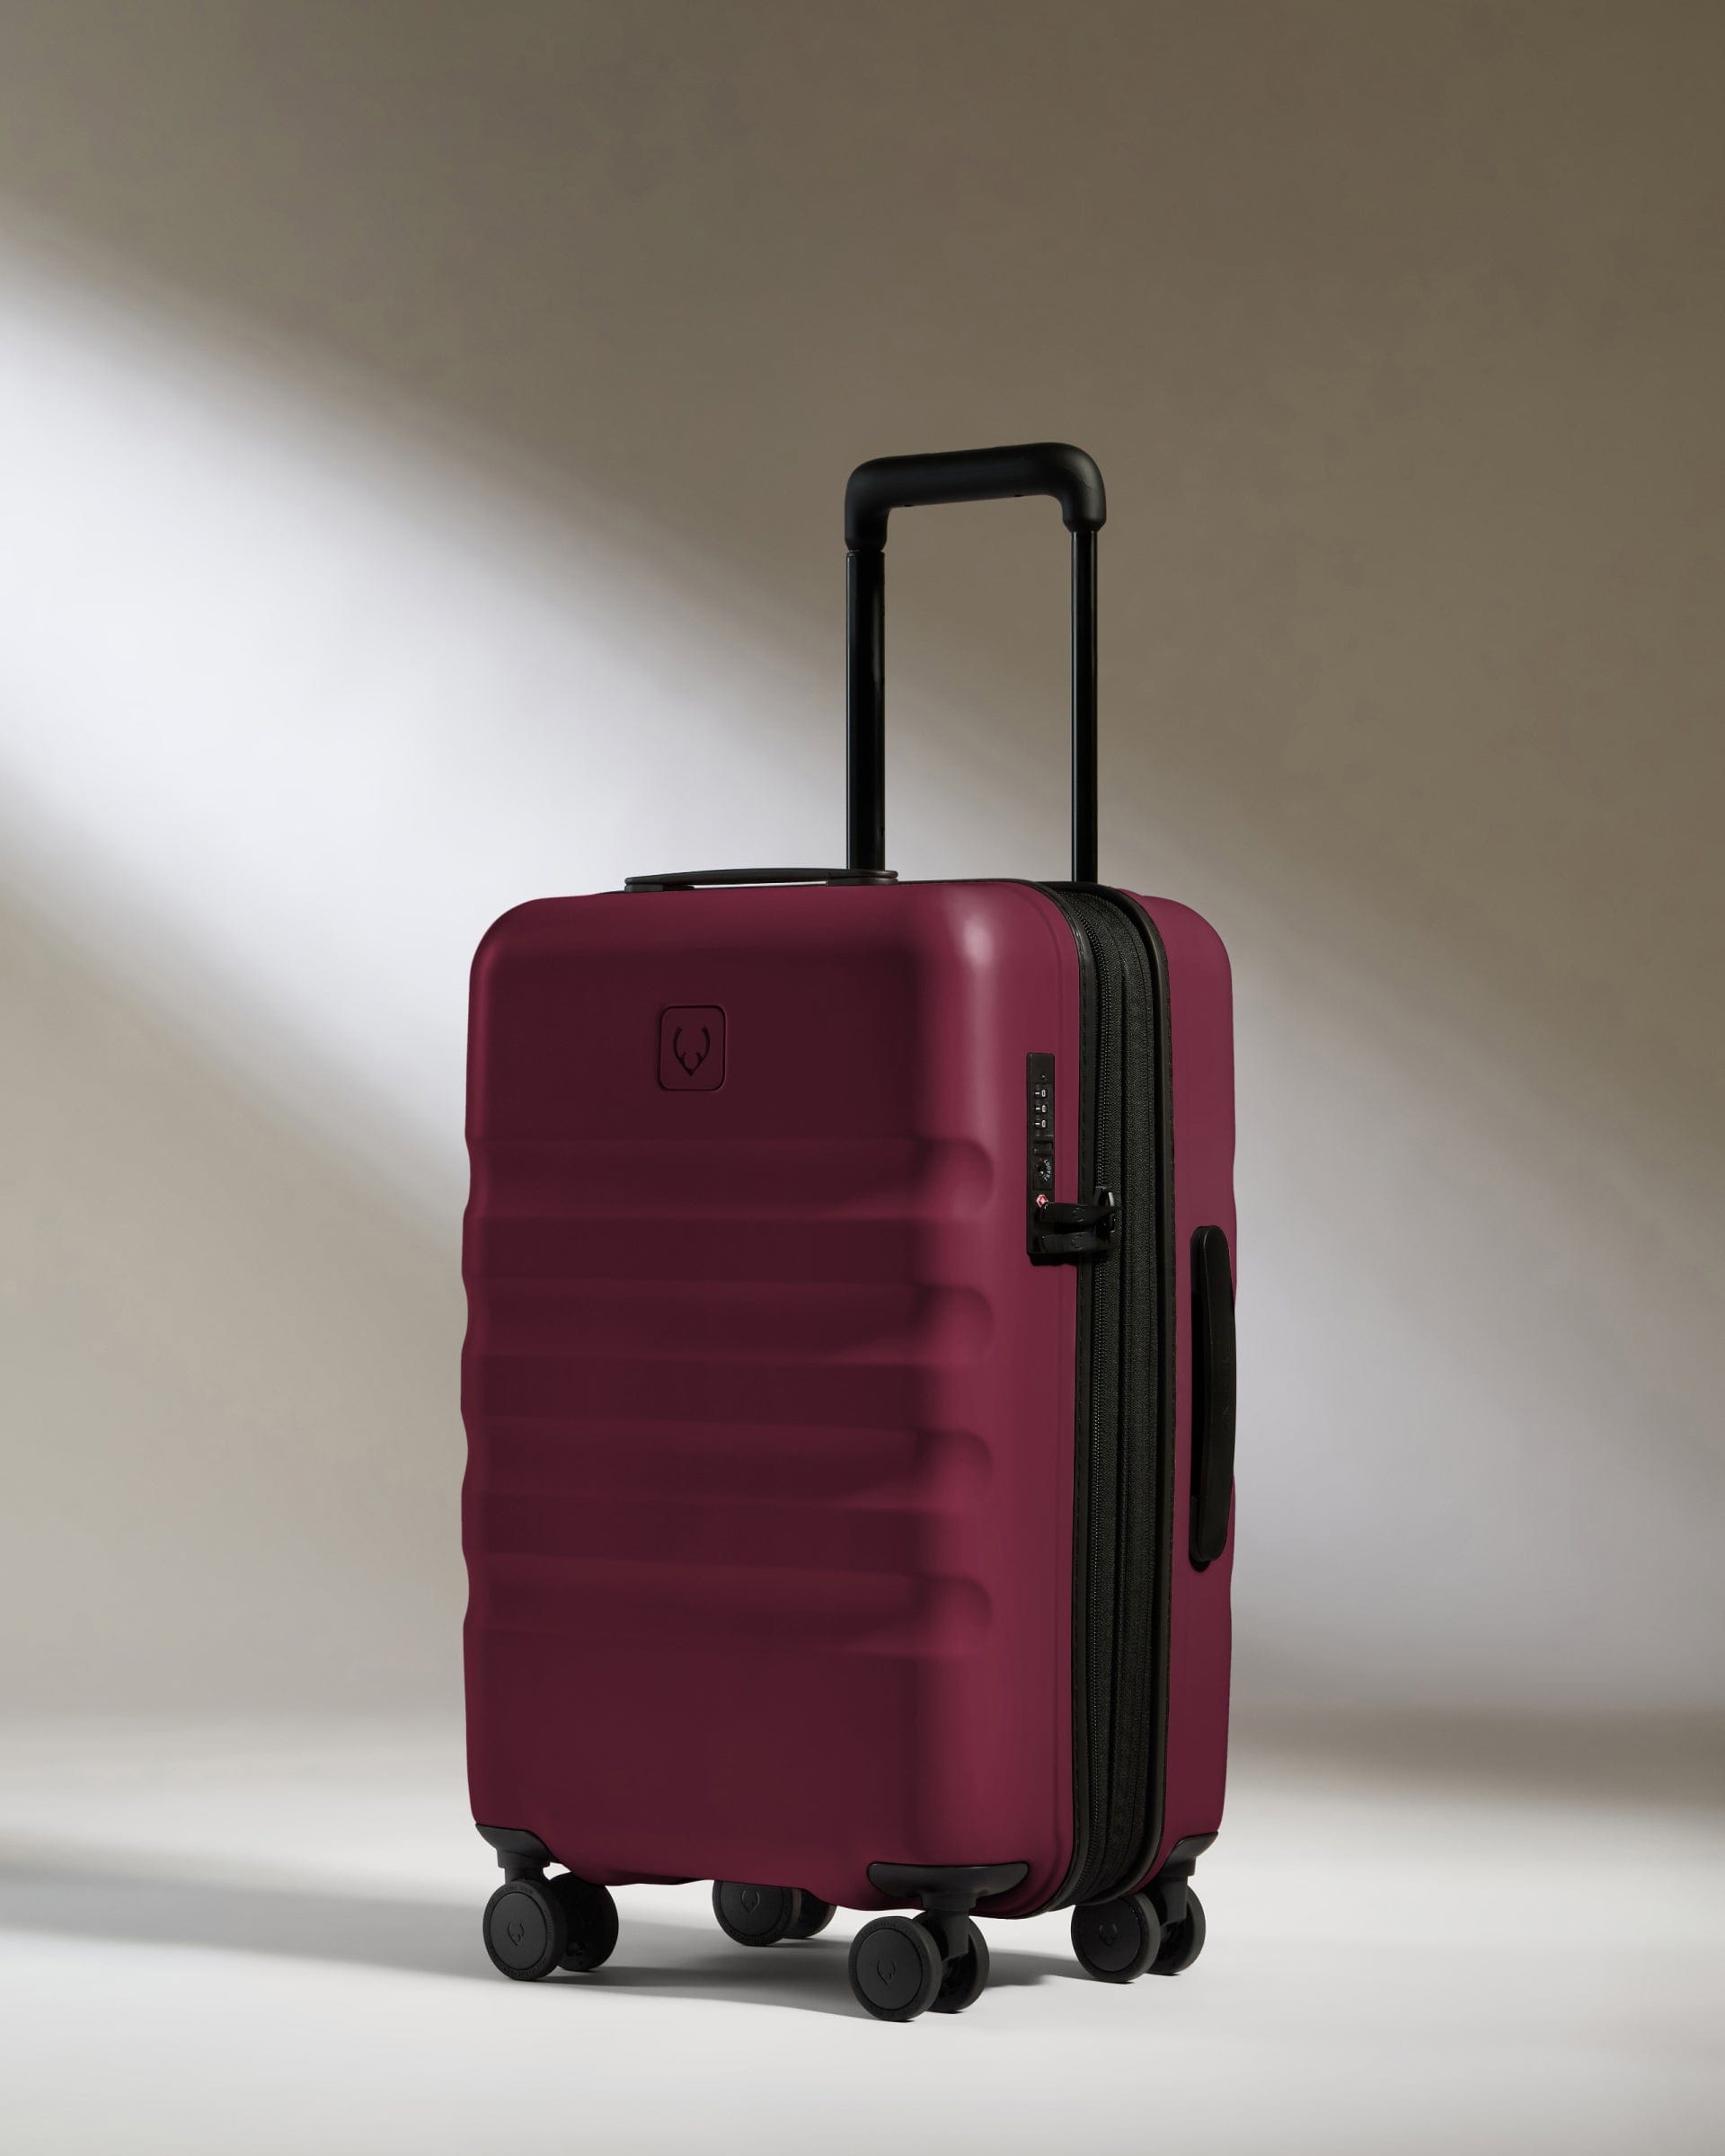 View Antler Icon Stripe Cabin Suitcase With Expander In Heather Purple Size 23cm x 55cm x 36cm information